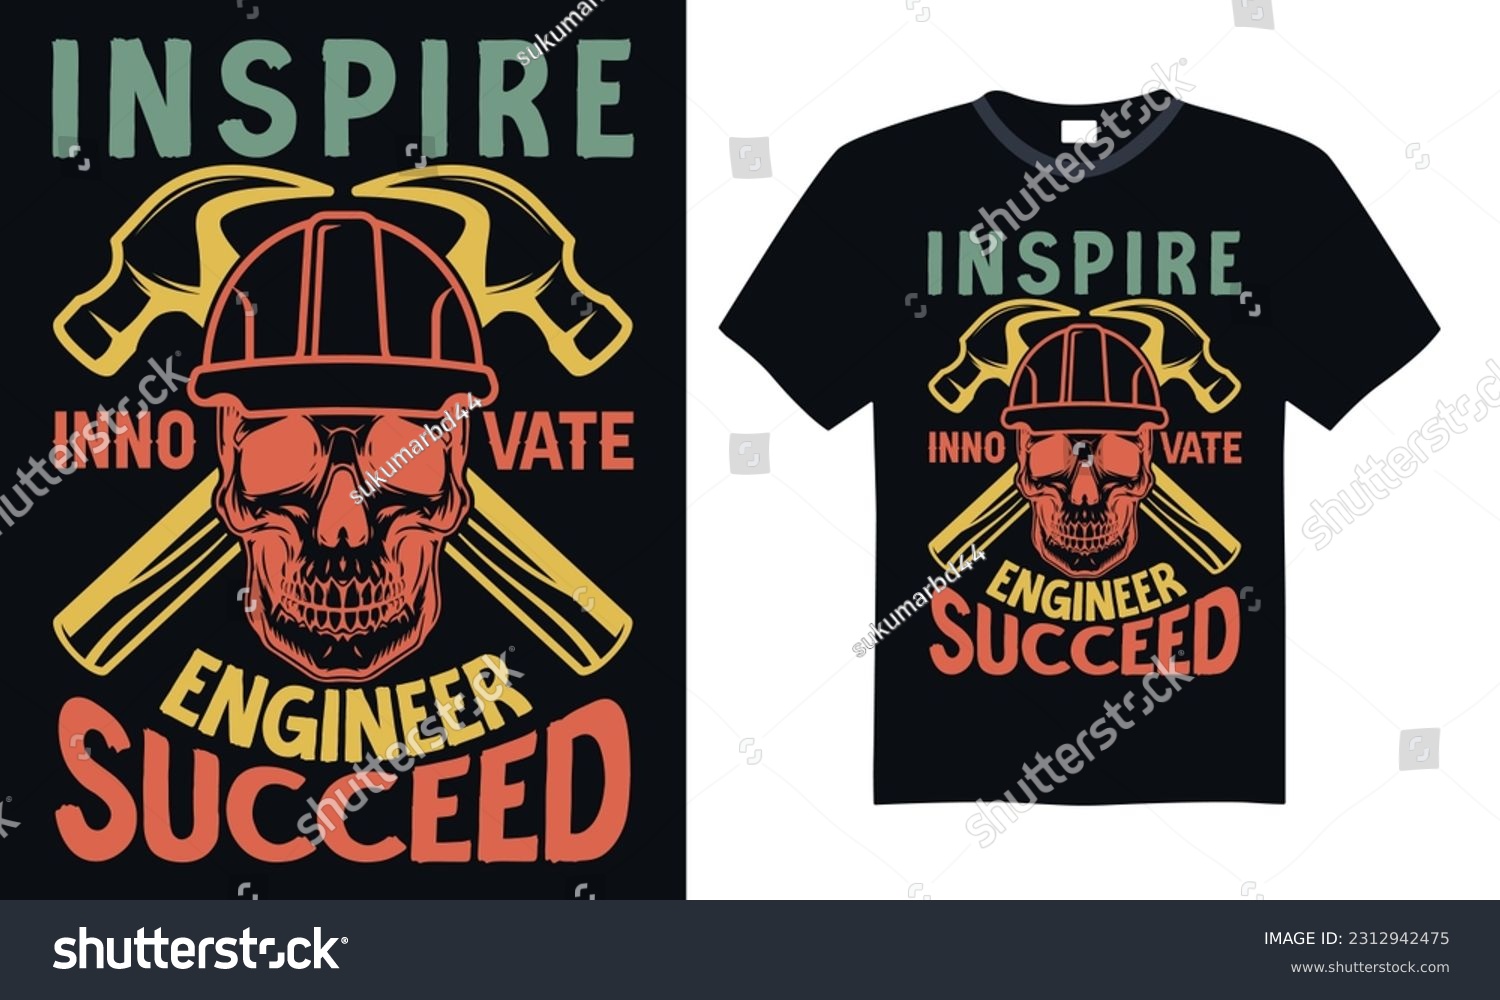 SVG of Inspire Innovate Engineer Succeed - Engineering T-shirt Design, SVG Files for Cutting, Handmade calligraphy vector illustration, Hand written vector sign svg